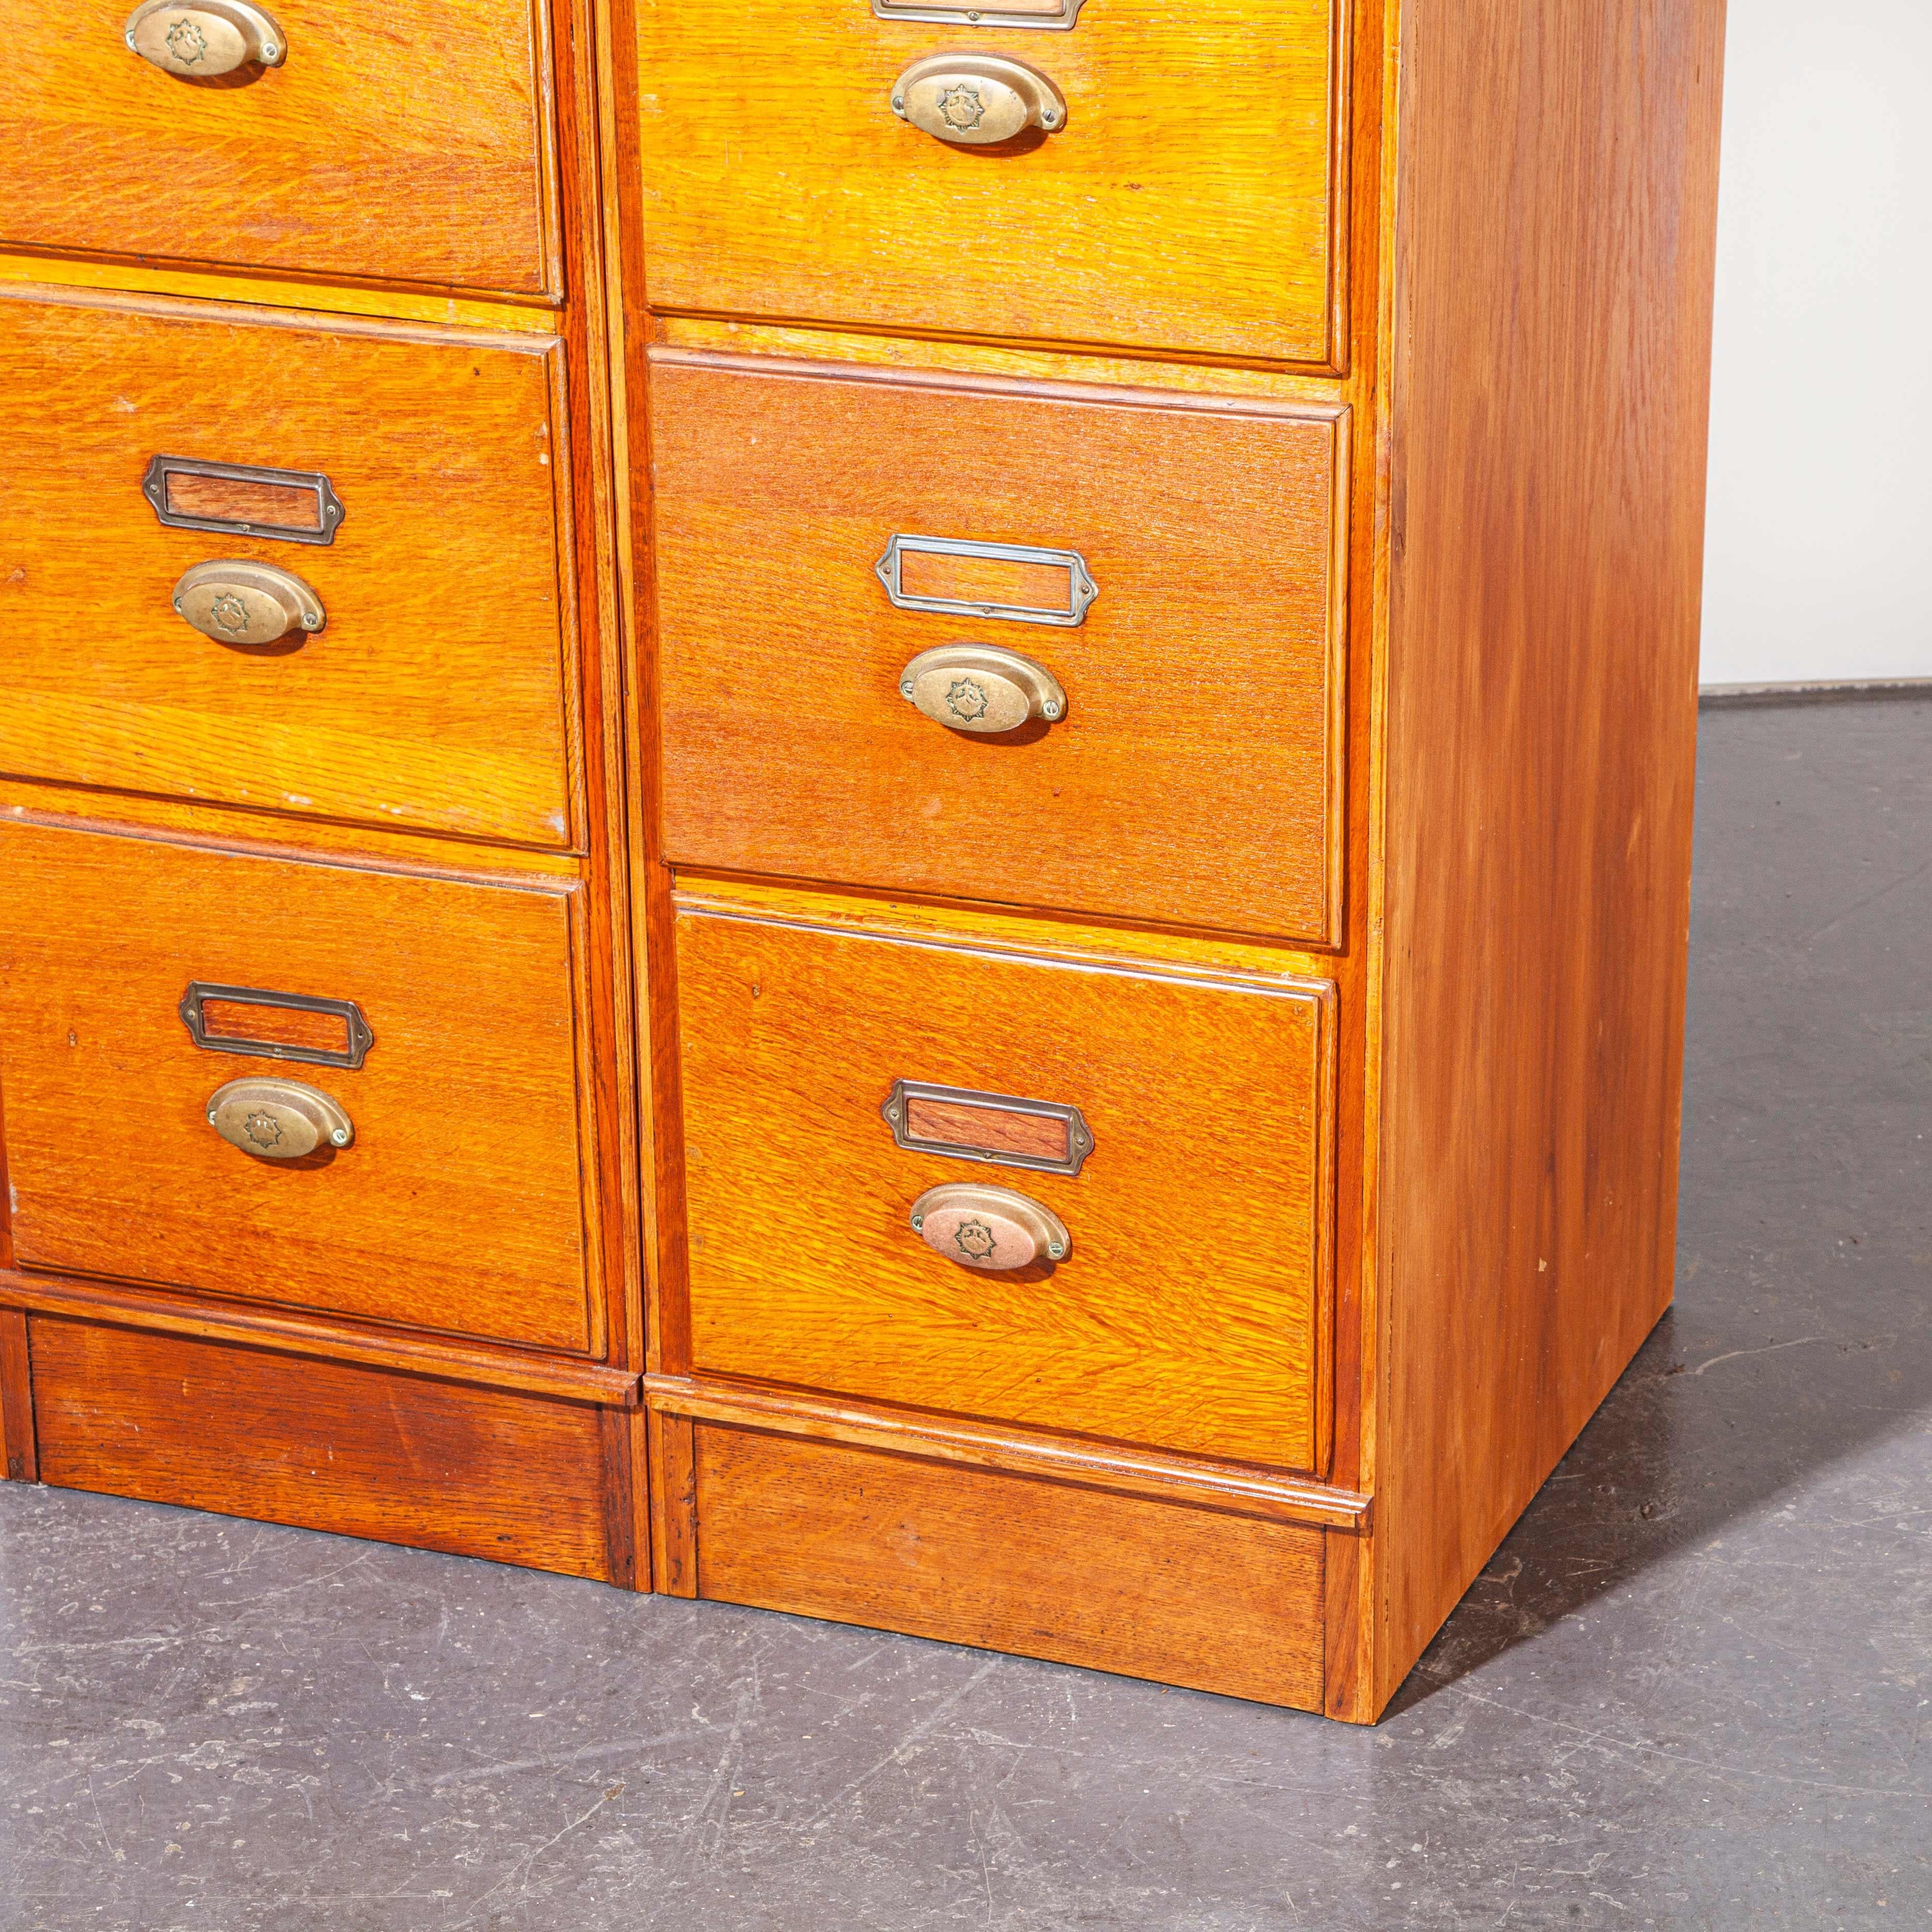 1930’s Tall Oak Four Drawer Filing Cabinet – Chest Of Drawers – Two Units

1930’s Tall oak four drawer filing cabinet – chest of drawers – two units. Sourced from a Belgian atelier this is a rare run of five lovely original filing cabinets that